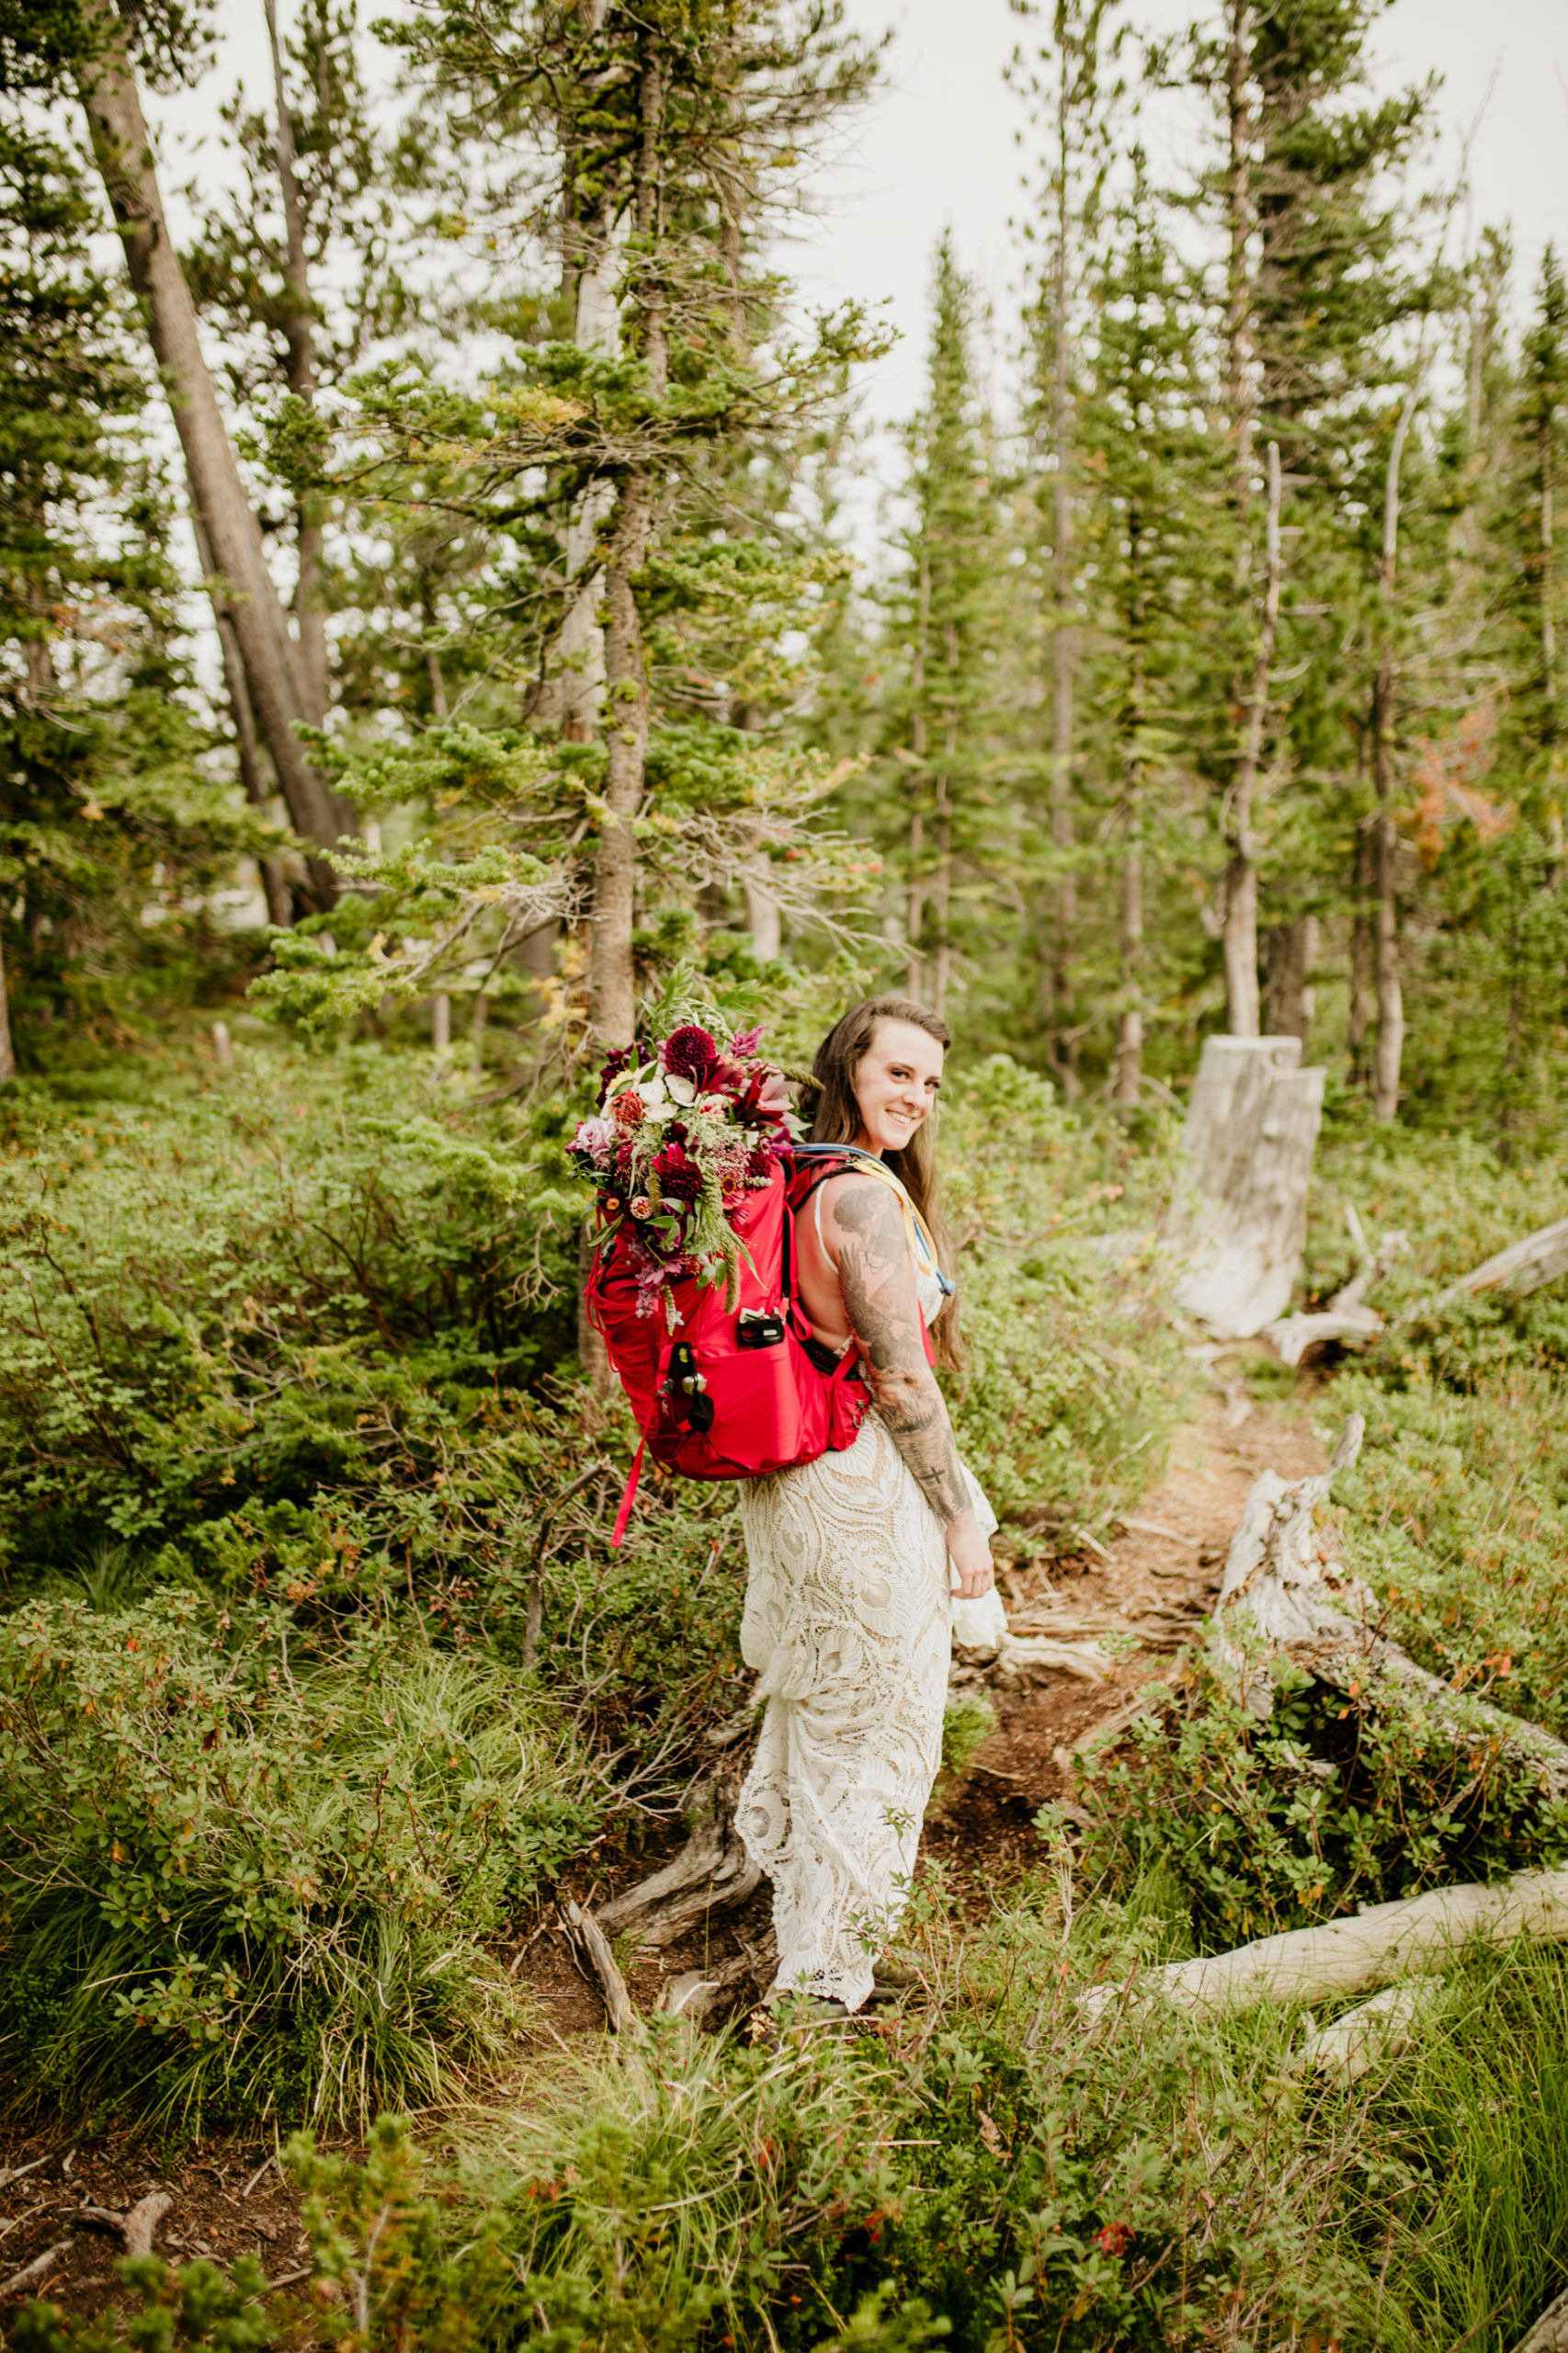 Montana hiking adventure session. Montana is the perfect place for an epic hike and gorgeous photos of you and your love. This secluded hike in Montana included an alpine lake!